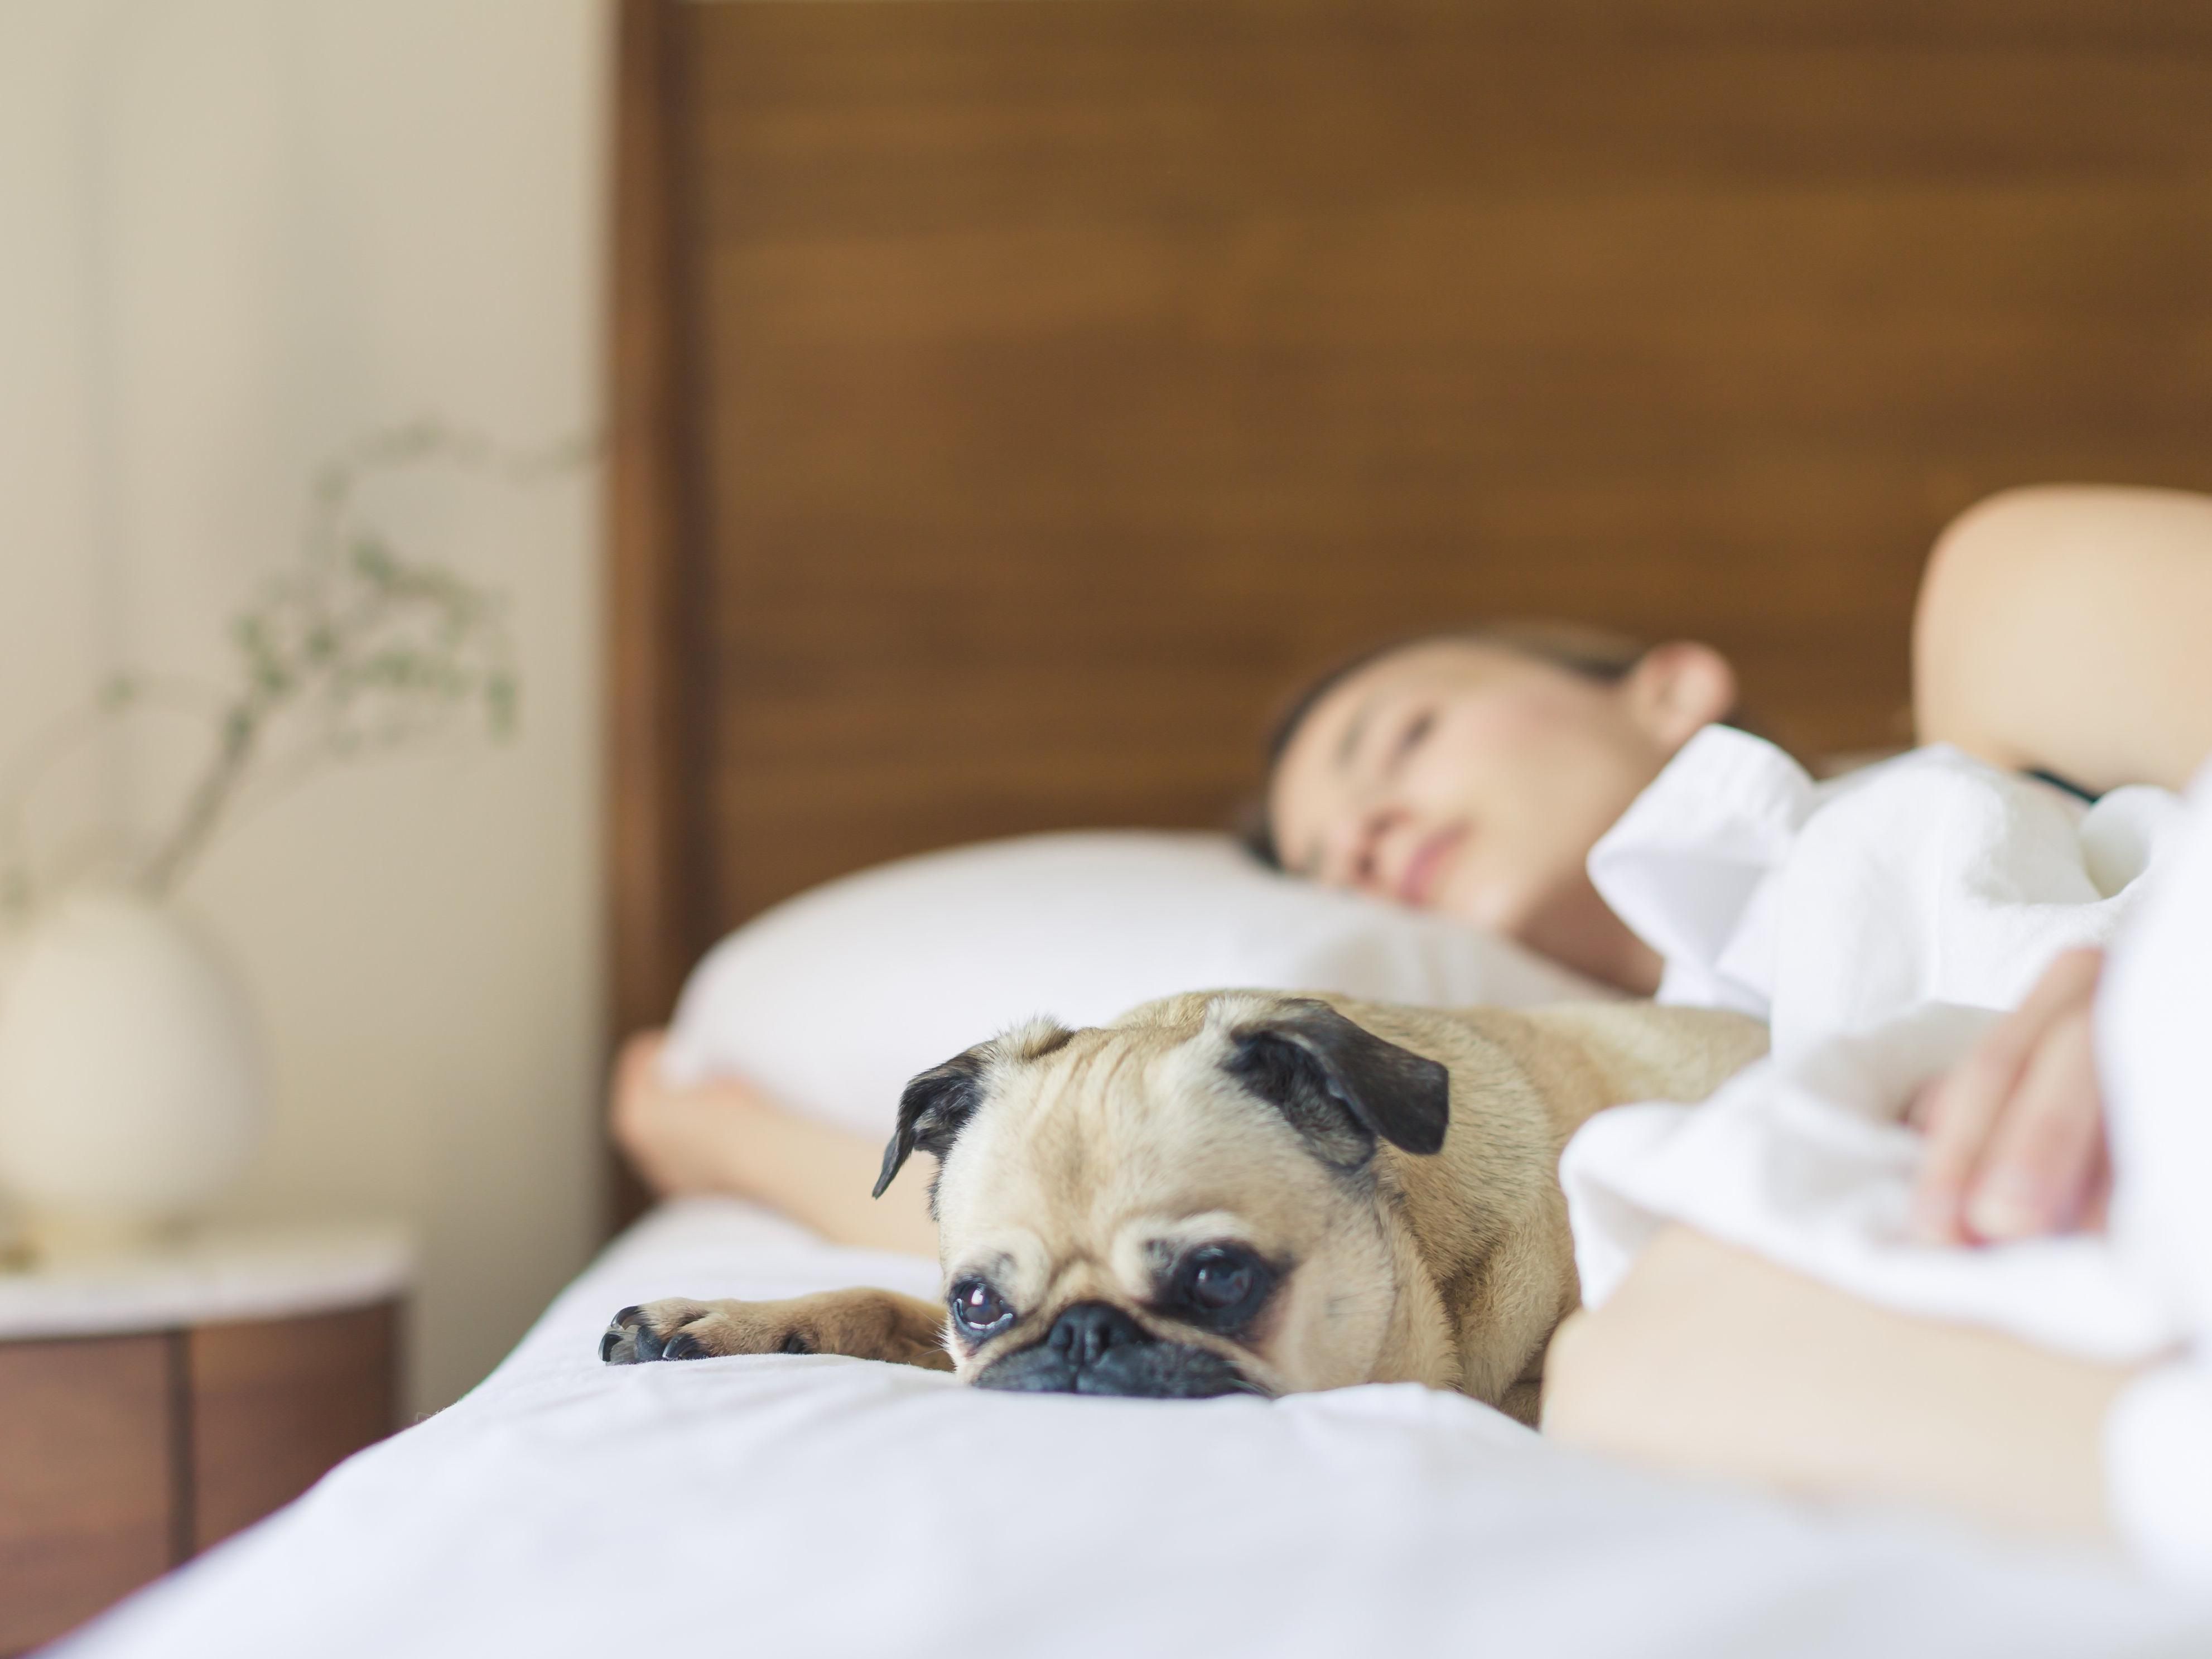 We offer pet friendly rooms so you don't have to leave your beloved pet behind! You can bring your "furry friend" with you for a small one time only pet fee of $100 per stay.